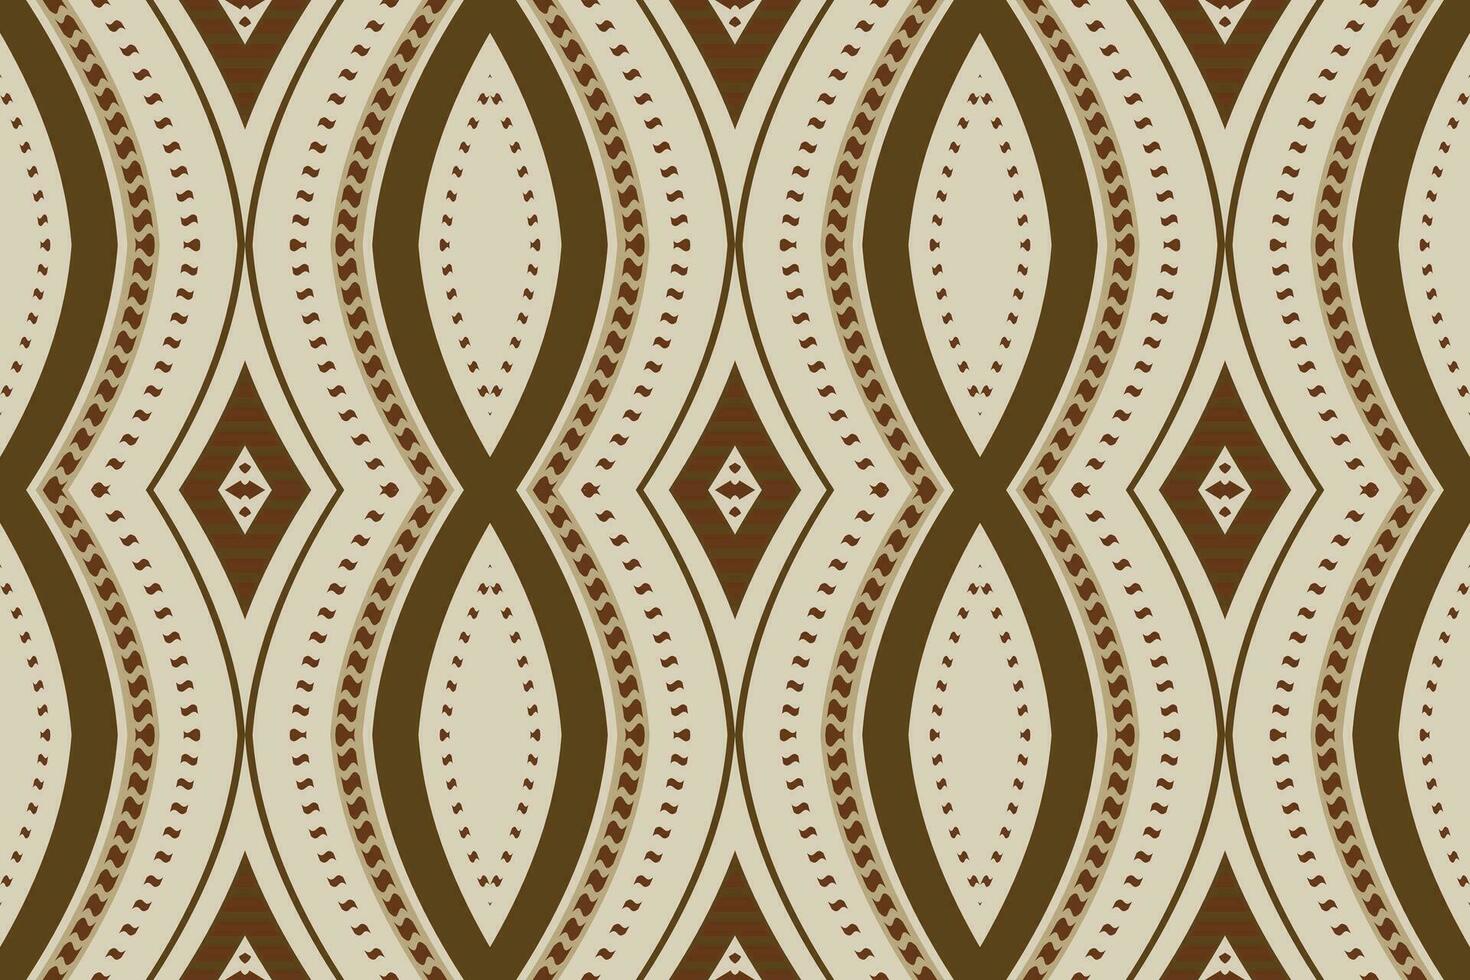 Ikat Damask Paisley Embroidery Background. Ikat Seamless Pattern Geometric Ethnic Oriental Pattern traditional.aztec Style Abstract Vector design for Texture,fabric,clothing,wrapping,sarong.